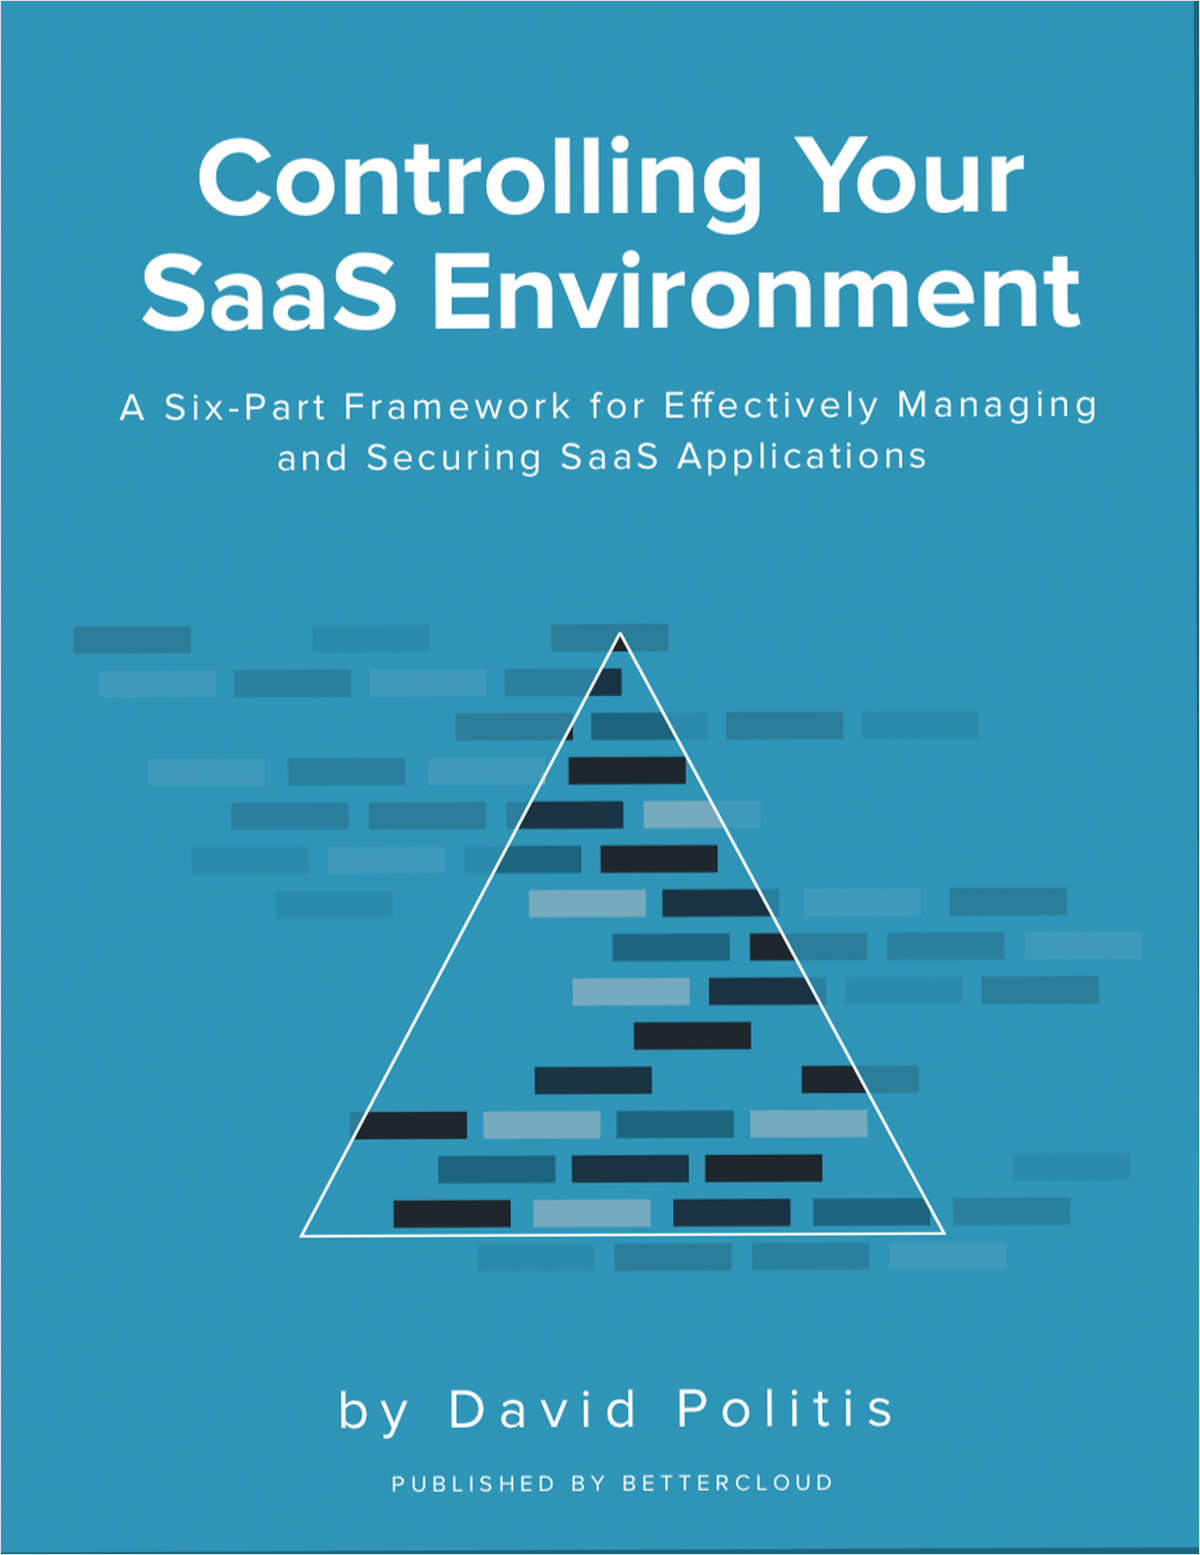 Controlling Your SaaS Environment